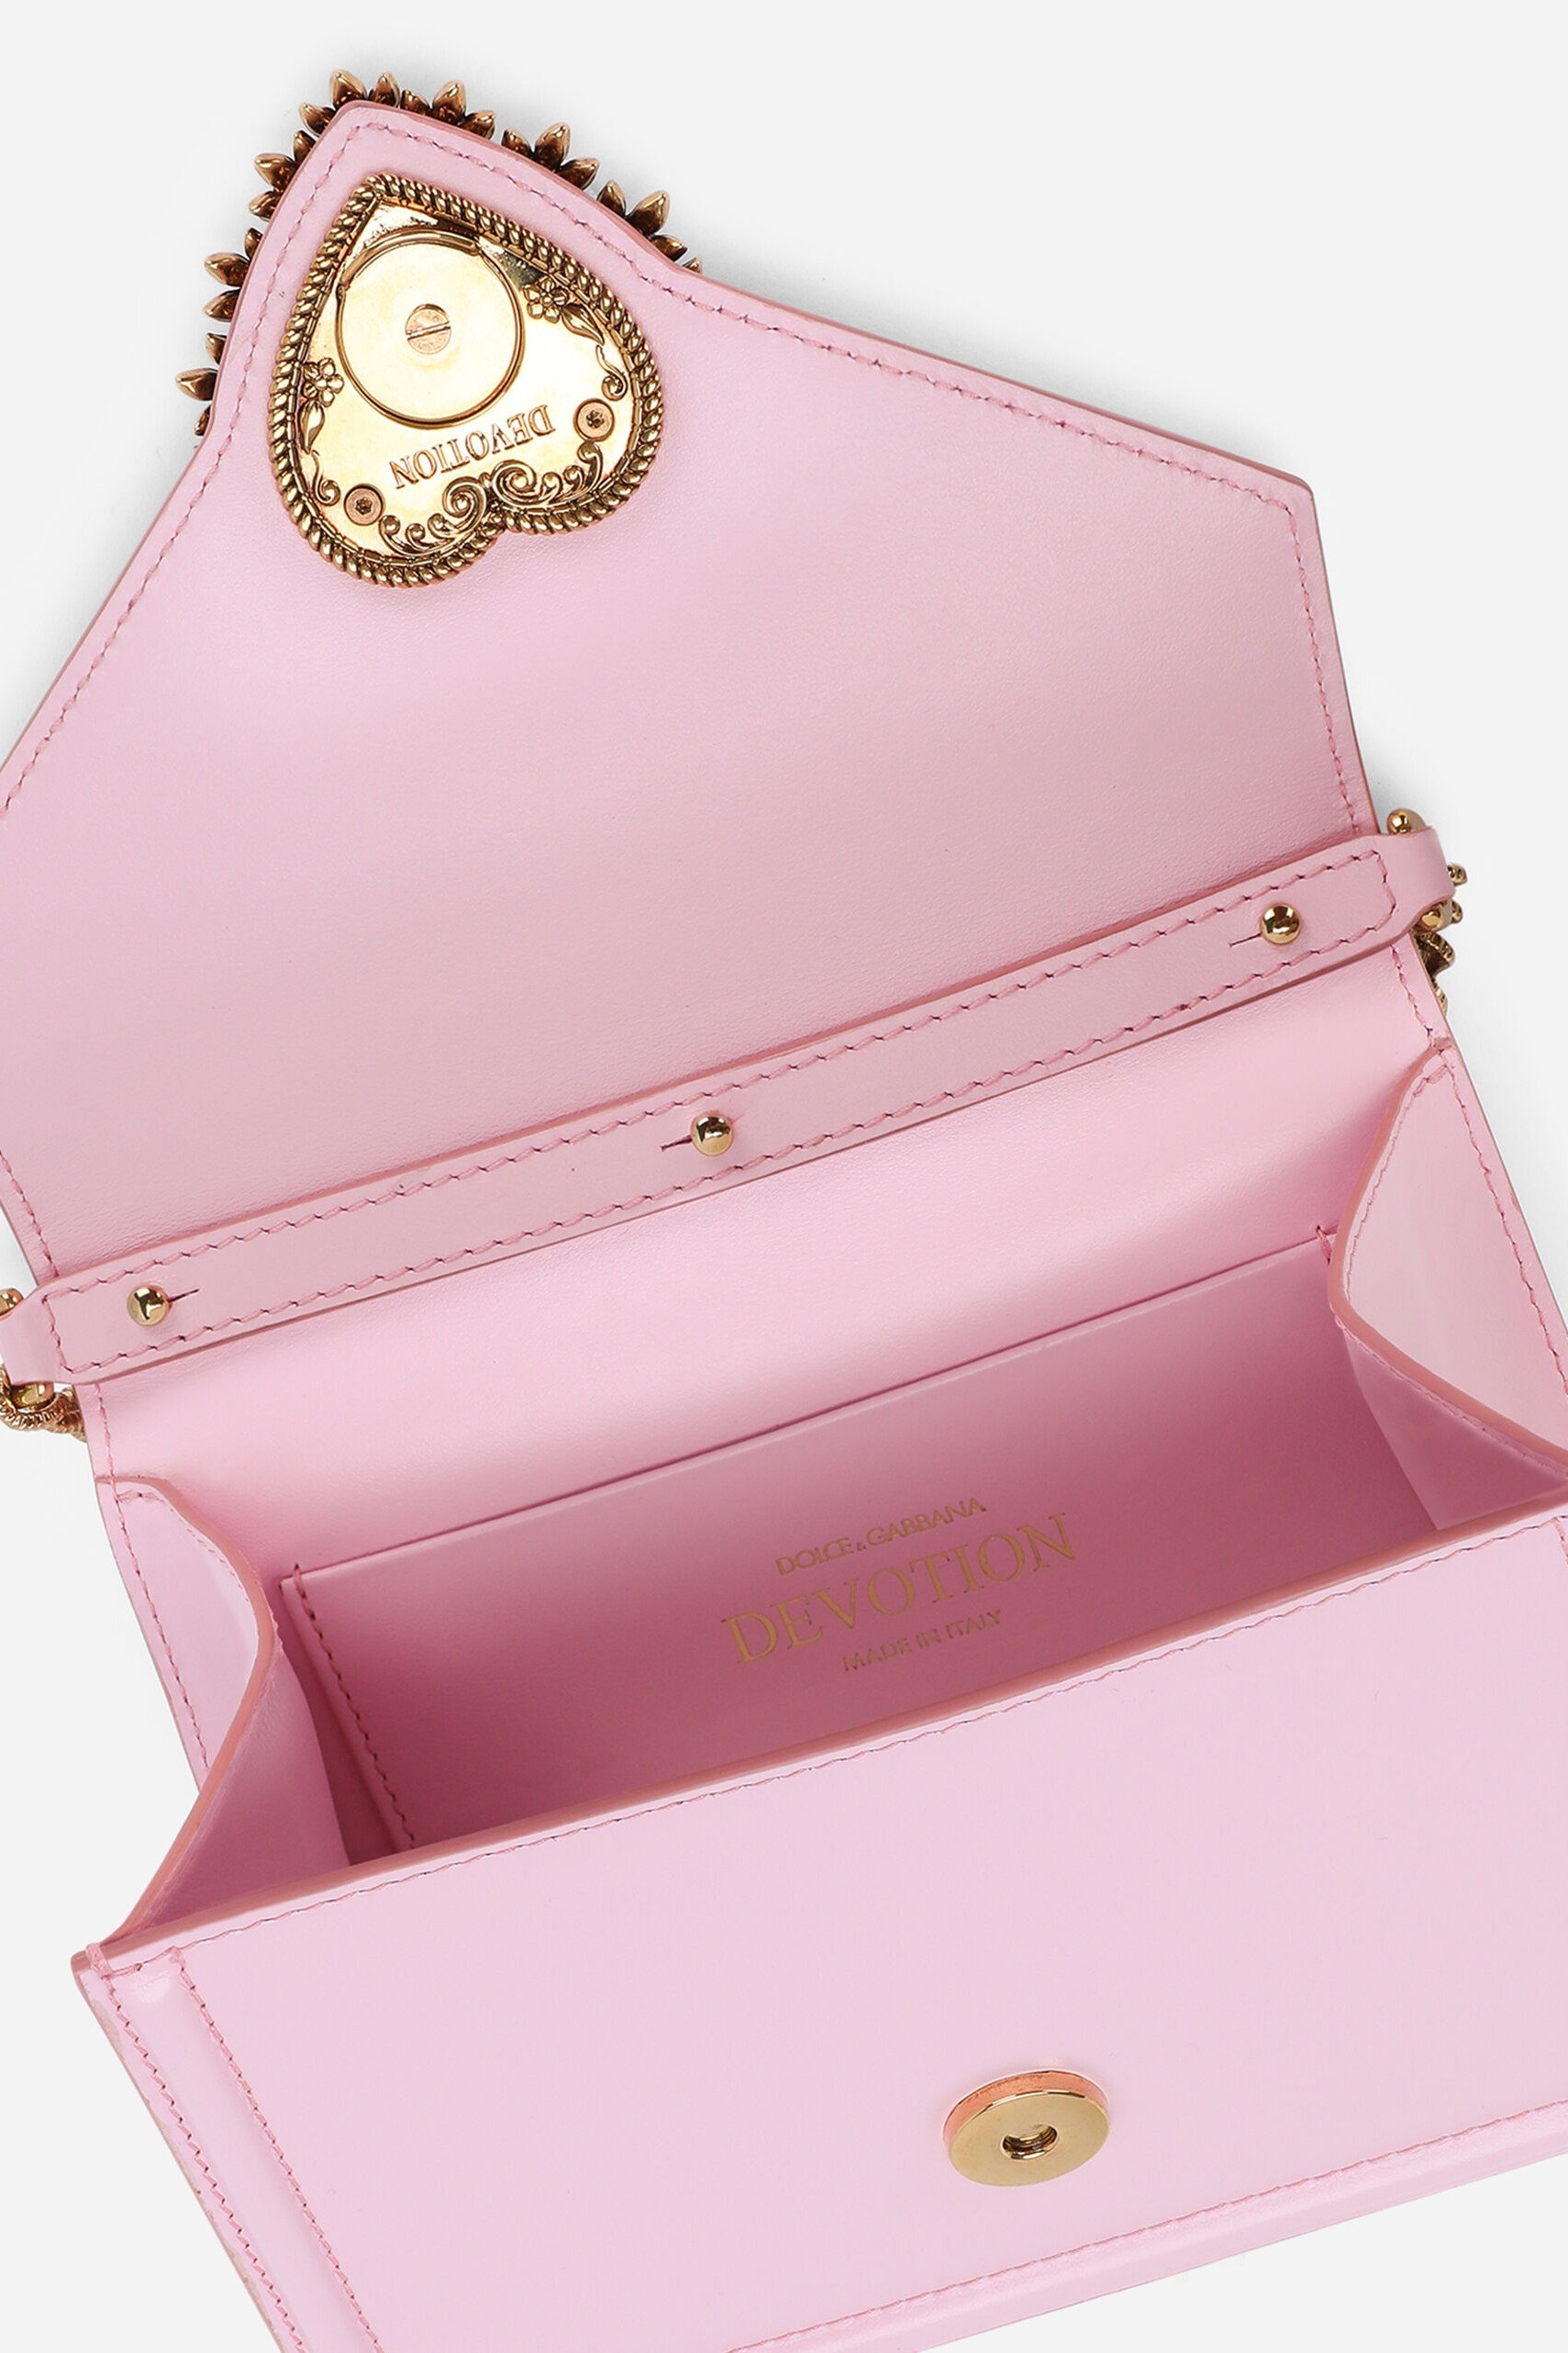 Small smooth calfskin Devotion bag - Pale Pink